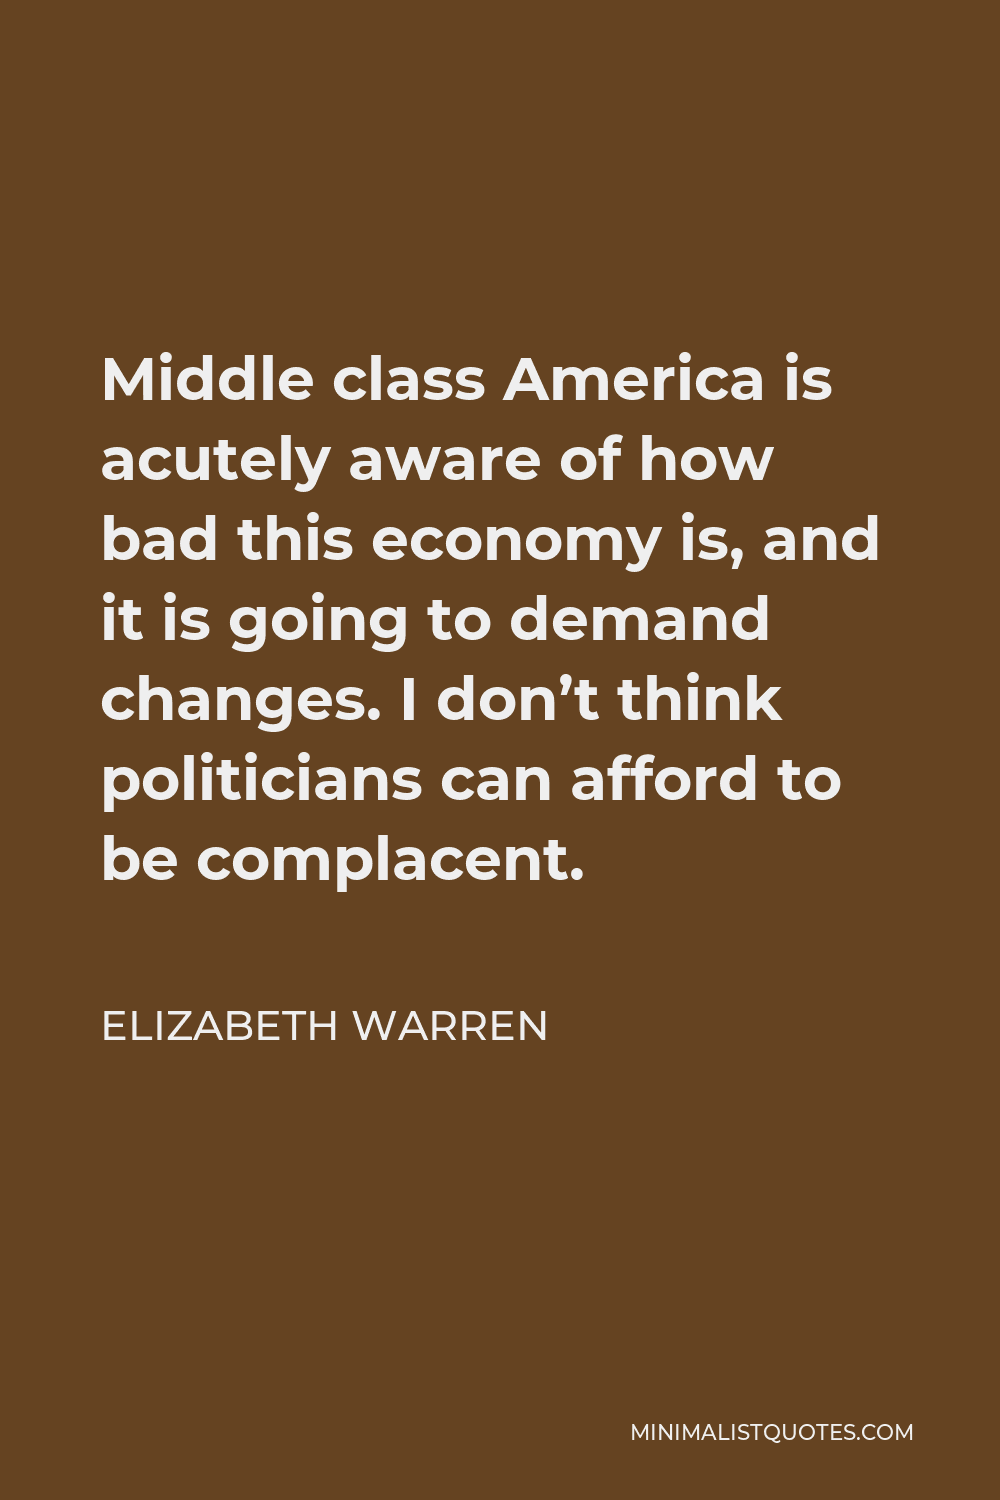 Elizabeth Warren Quote - Middle class America is acutely aware of how bad this economy is, and it is going to demand changes. I don’t think politicians can afford to be complacent.